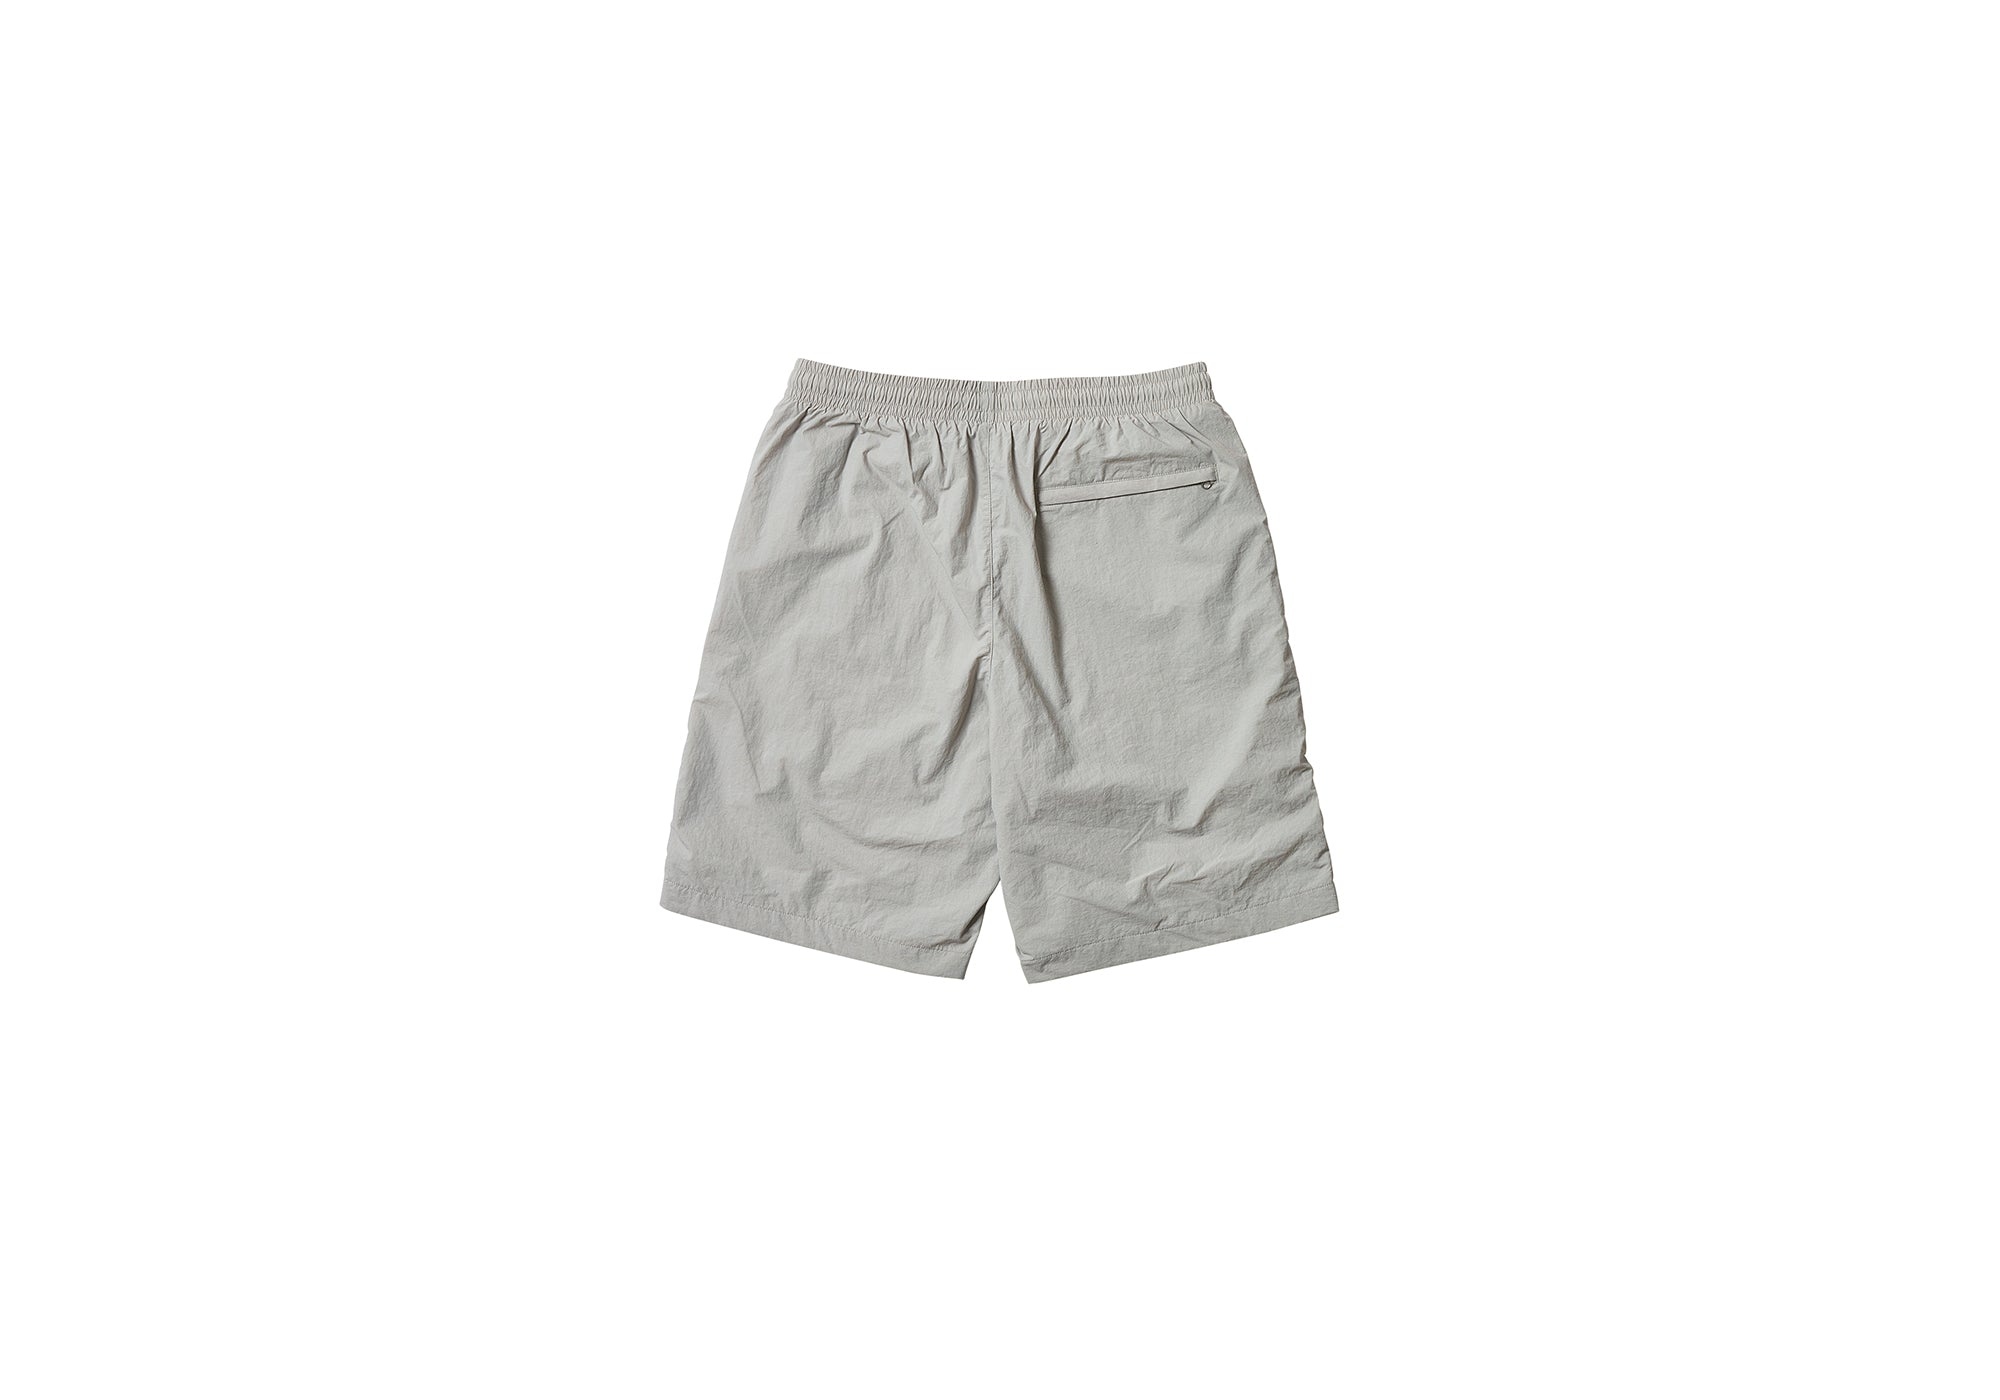 PIPED SHELL SHORT GREY - 2